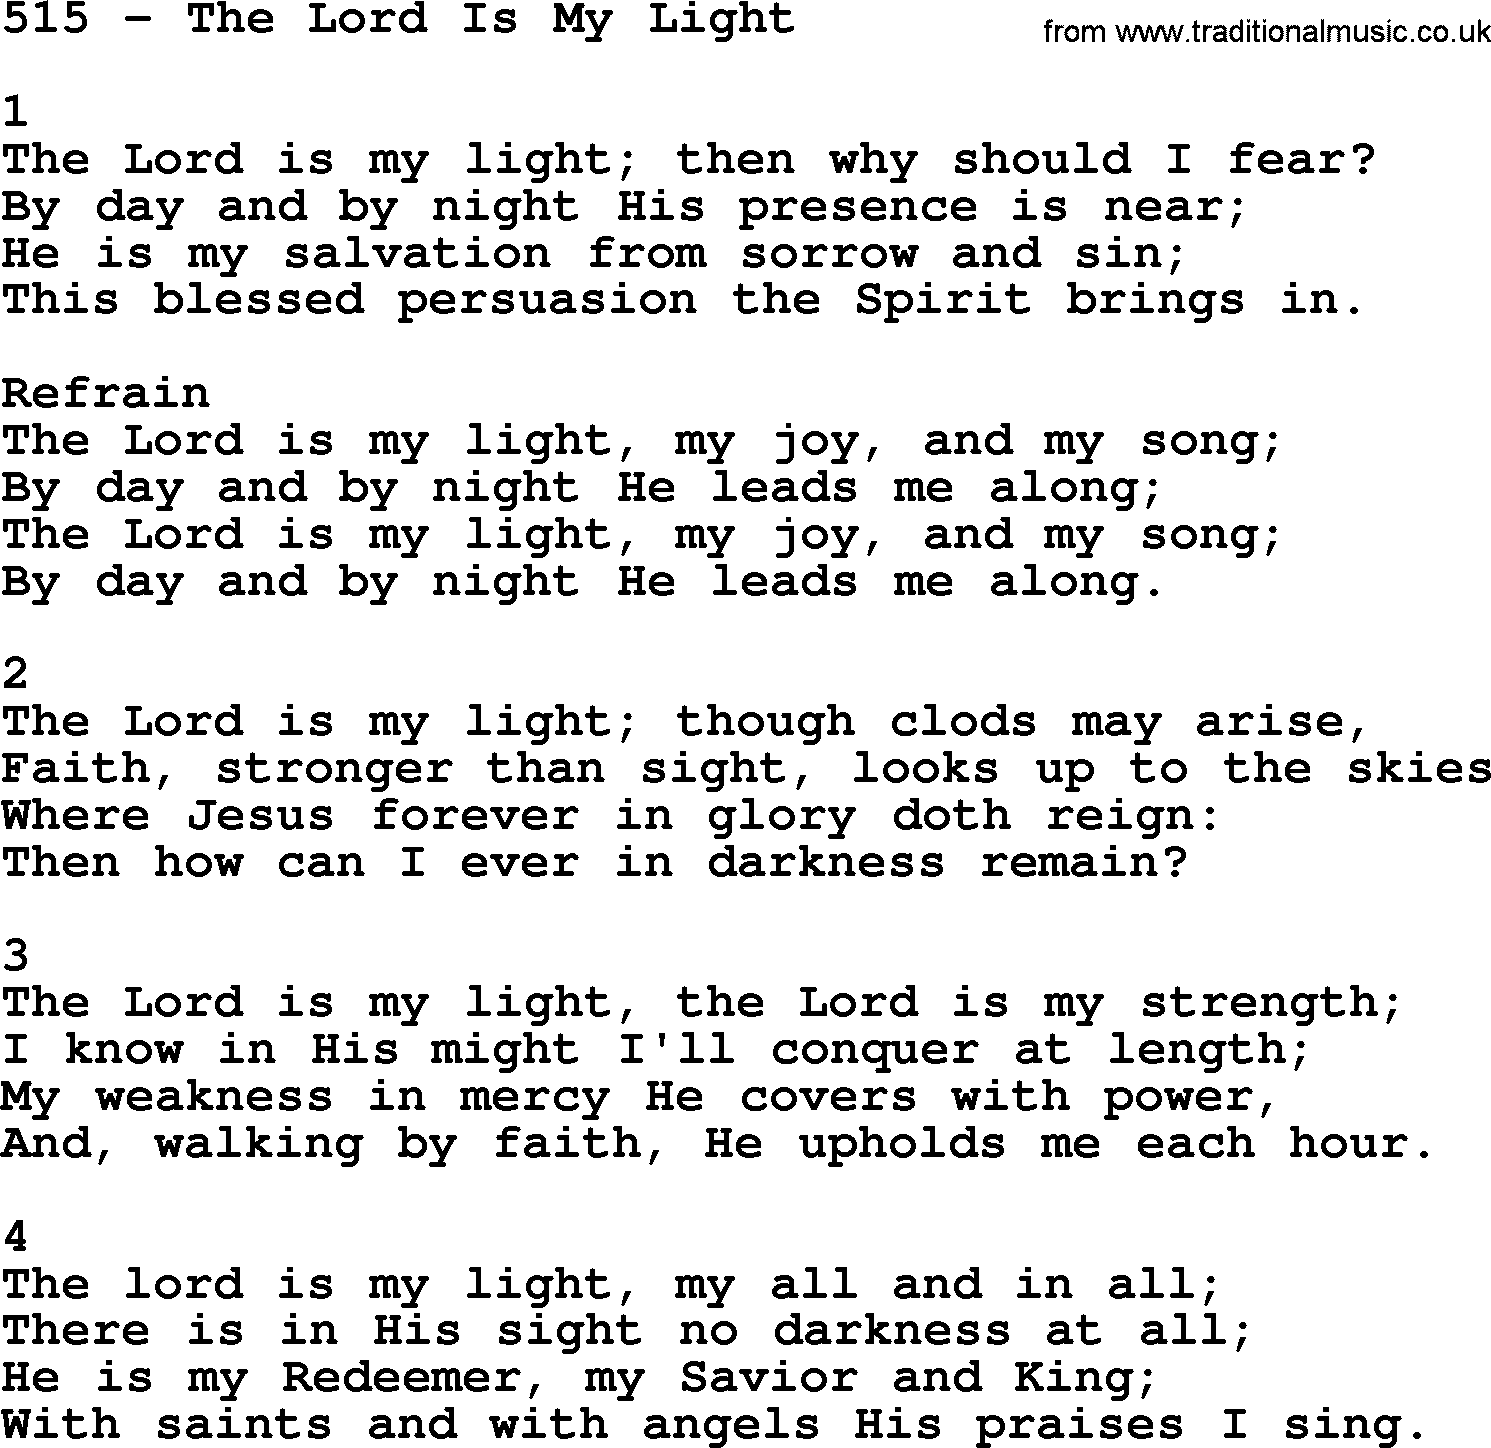 Complete Adventis Hymnal, title: 515-The Lord Is My Light, with lyrics, midi, mp3, powerpoints(PPT) and PDF,